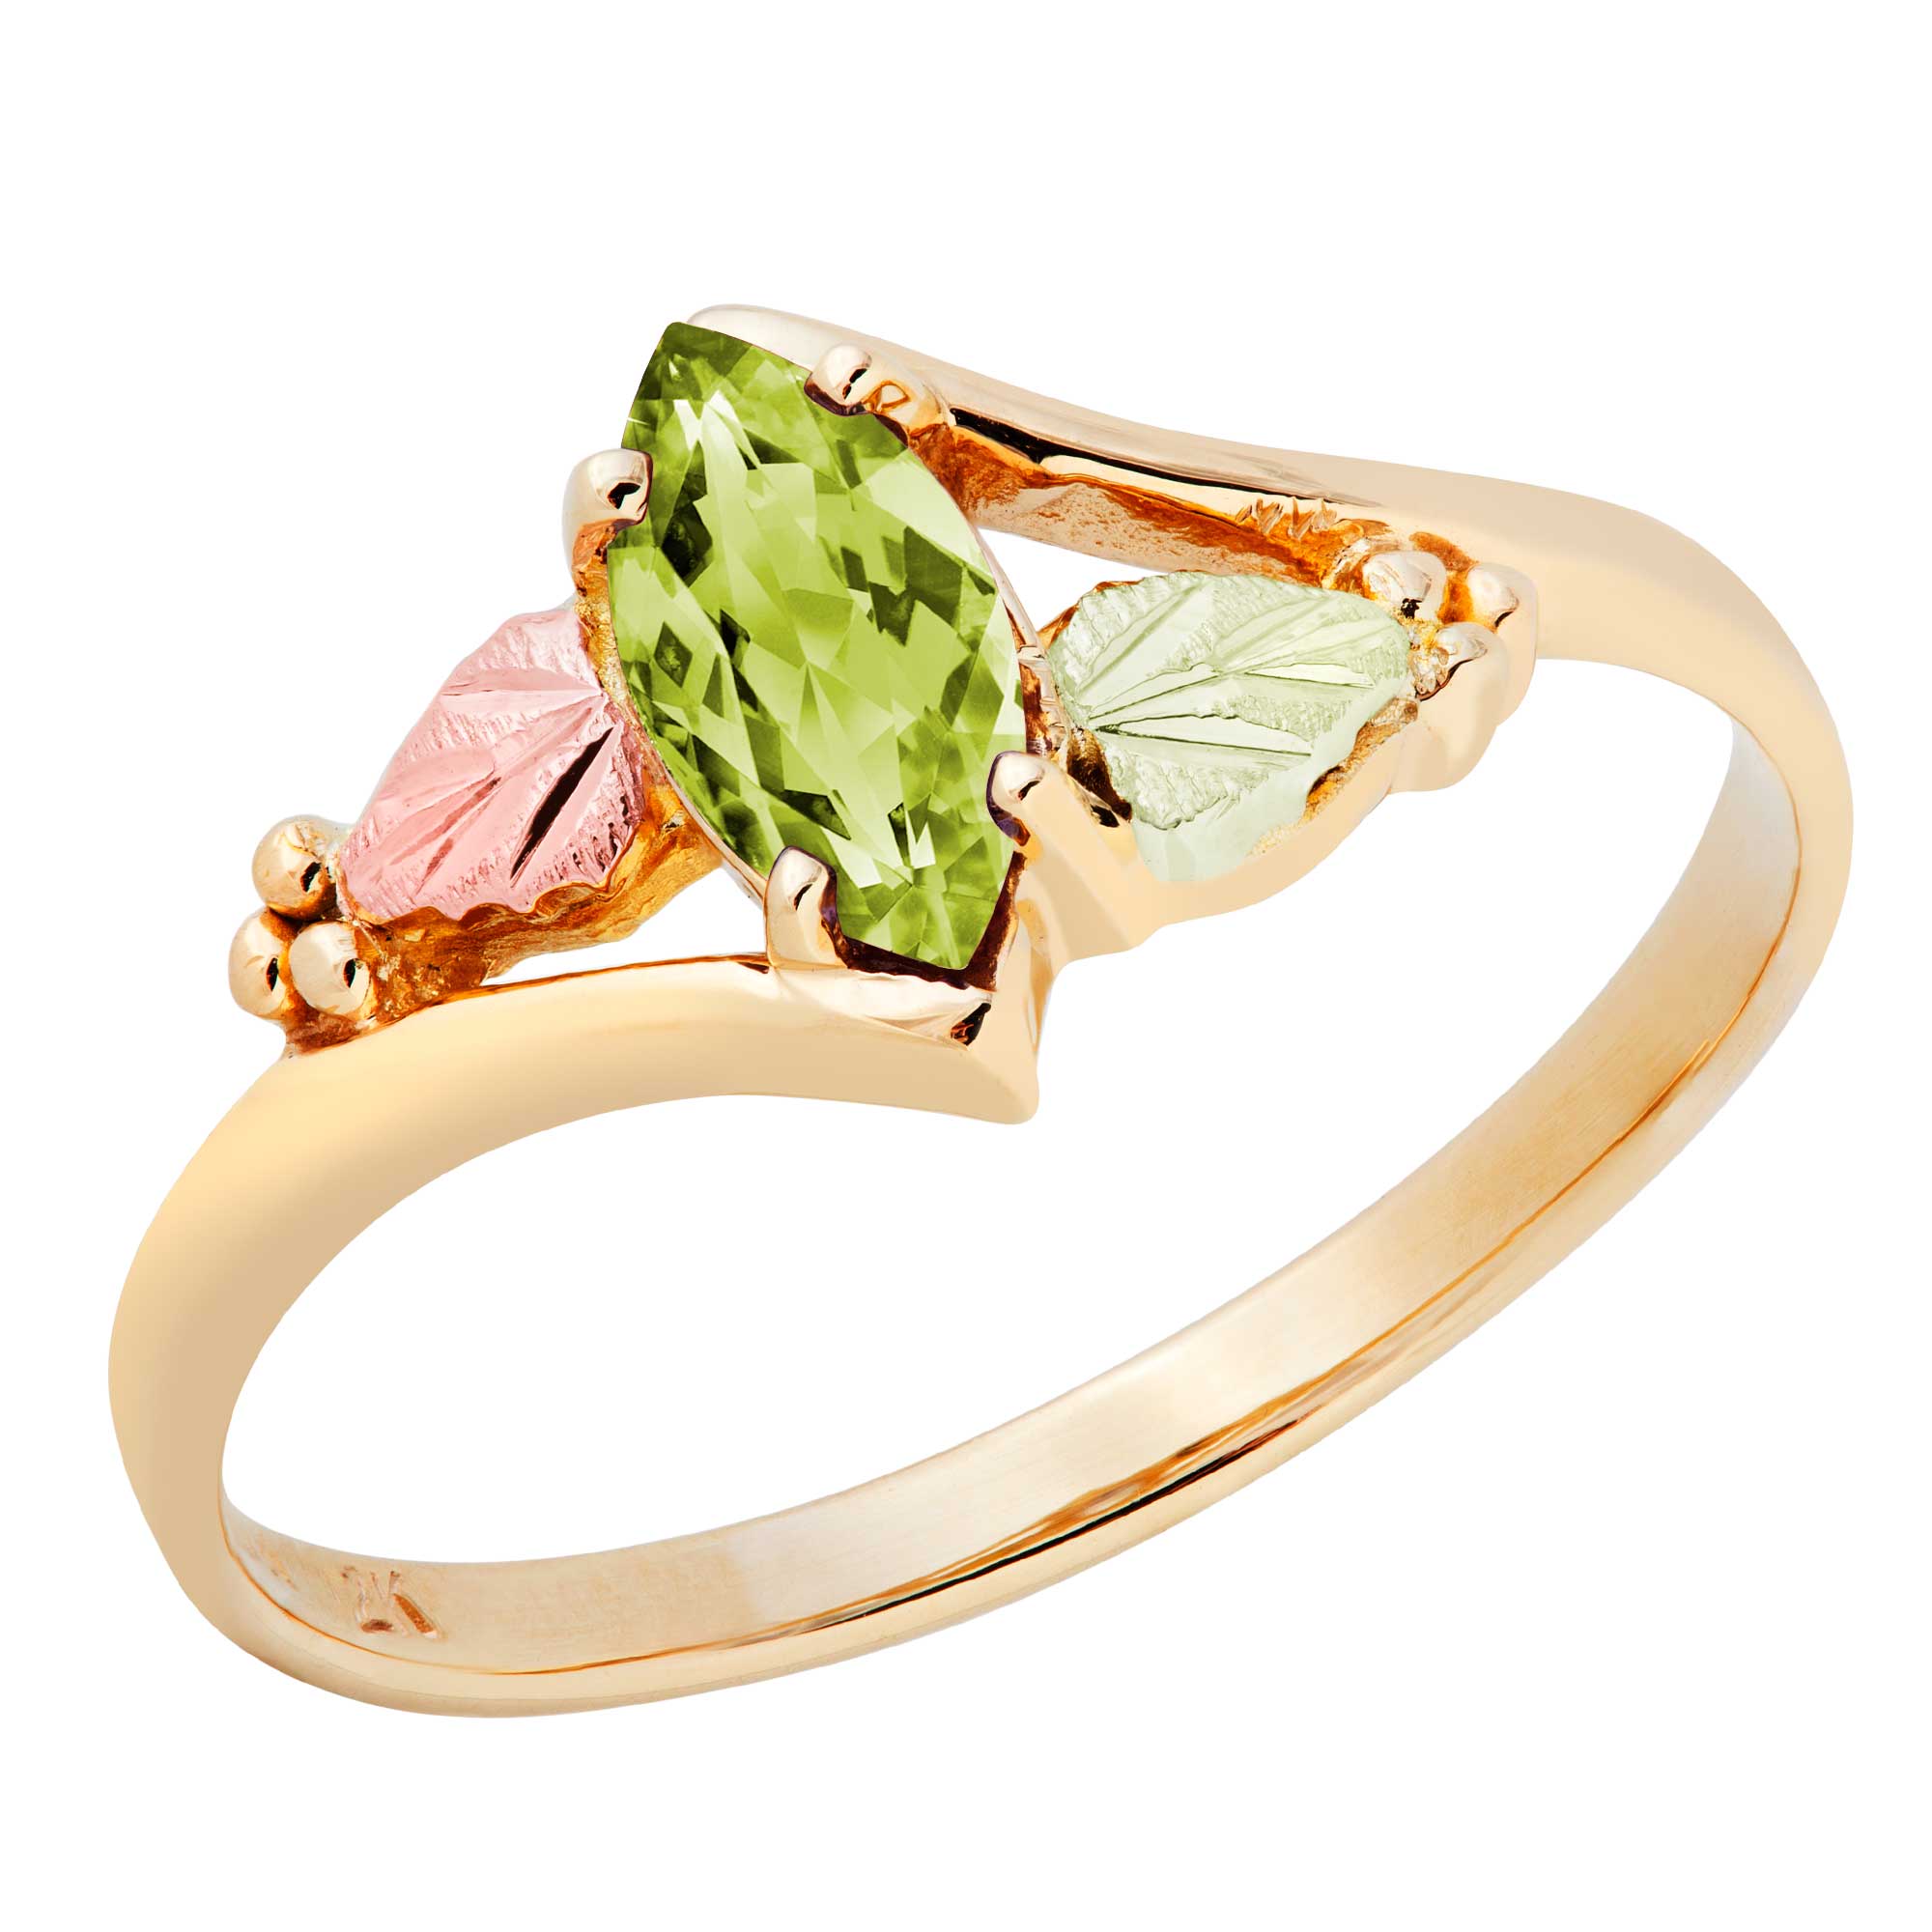 Created Soude Peridot Marquise August Birthstone Bypass Ring, Black Hills Gold motif. 